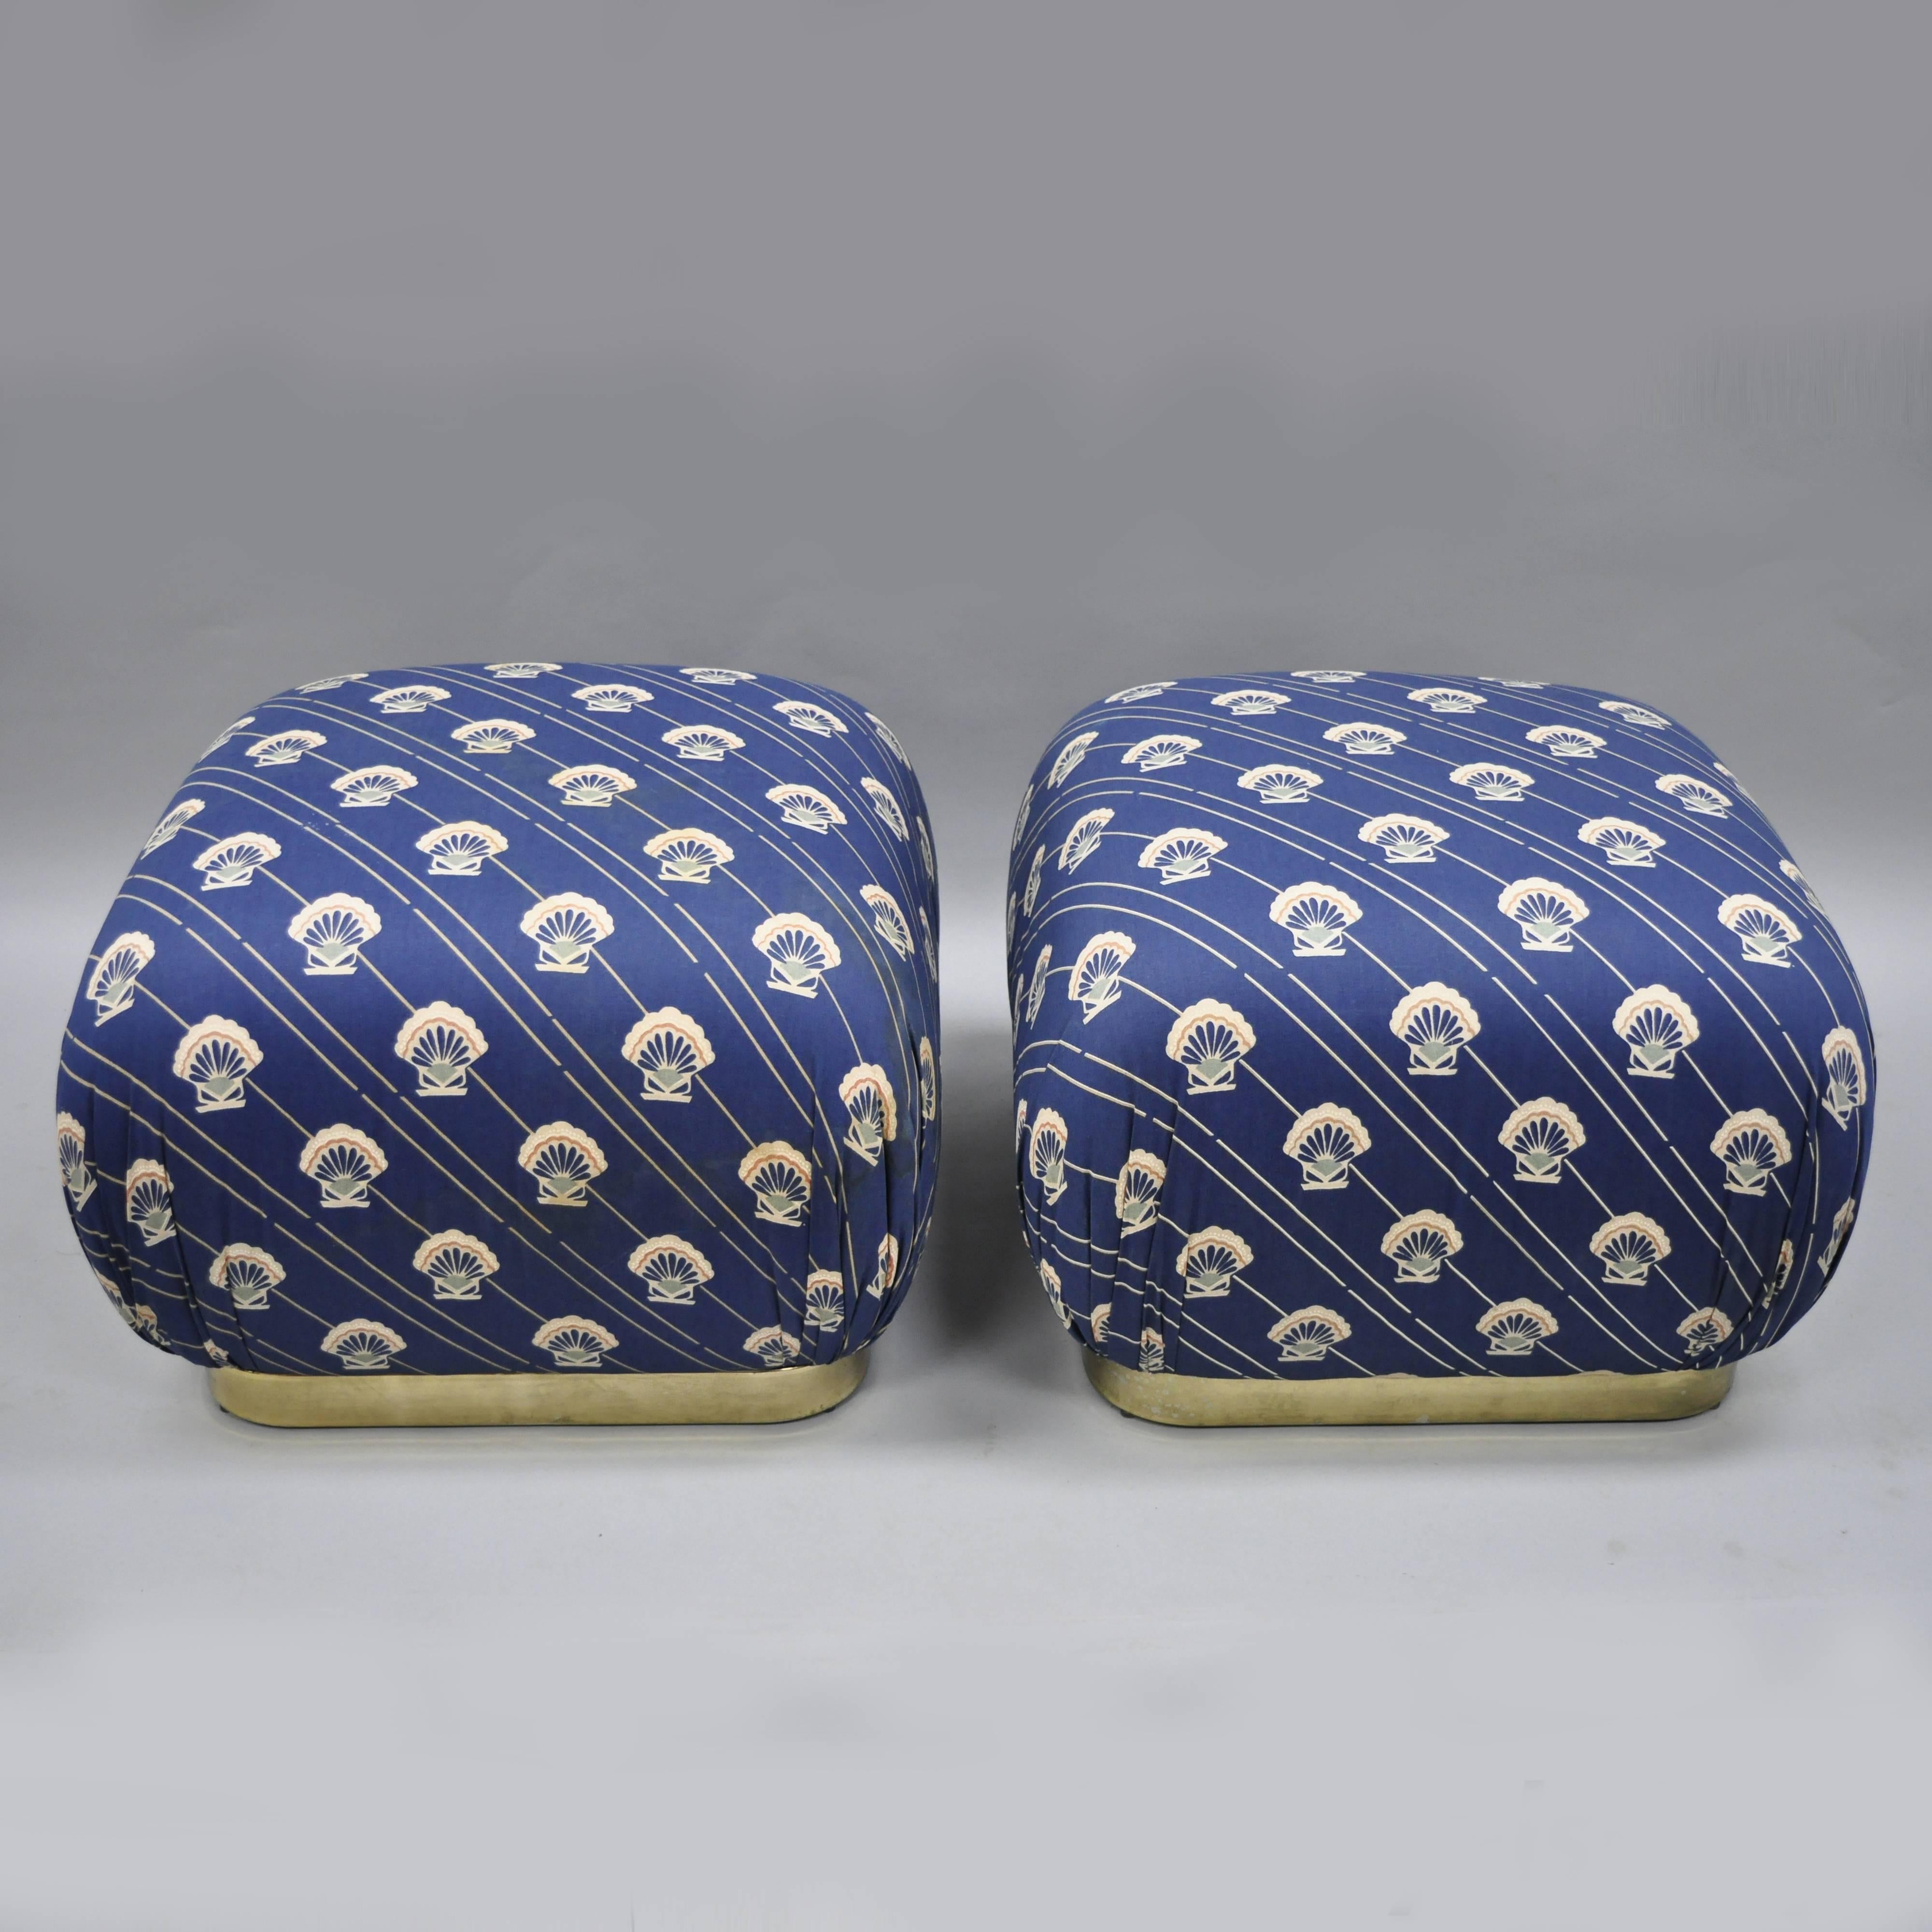 Pair of Weiman brass base upholstered pouf ottomans in the Karl Springer style. Item features brass-plated metal base, upholstered seat, original label, clean modernist lines, great style and form, mid-late 20th century. Measurements: 17